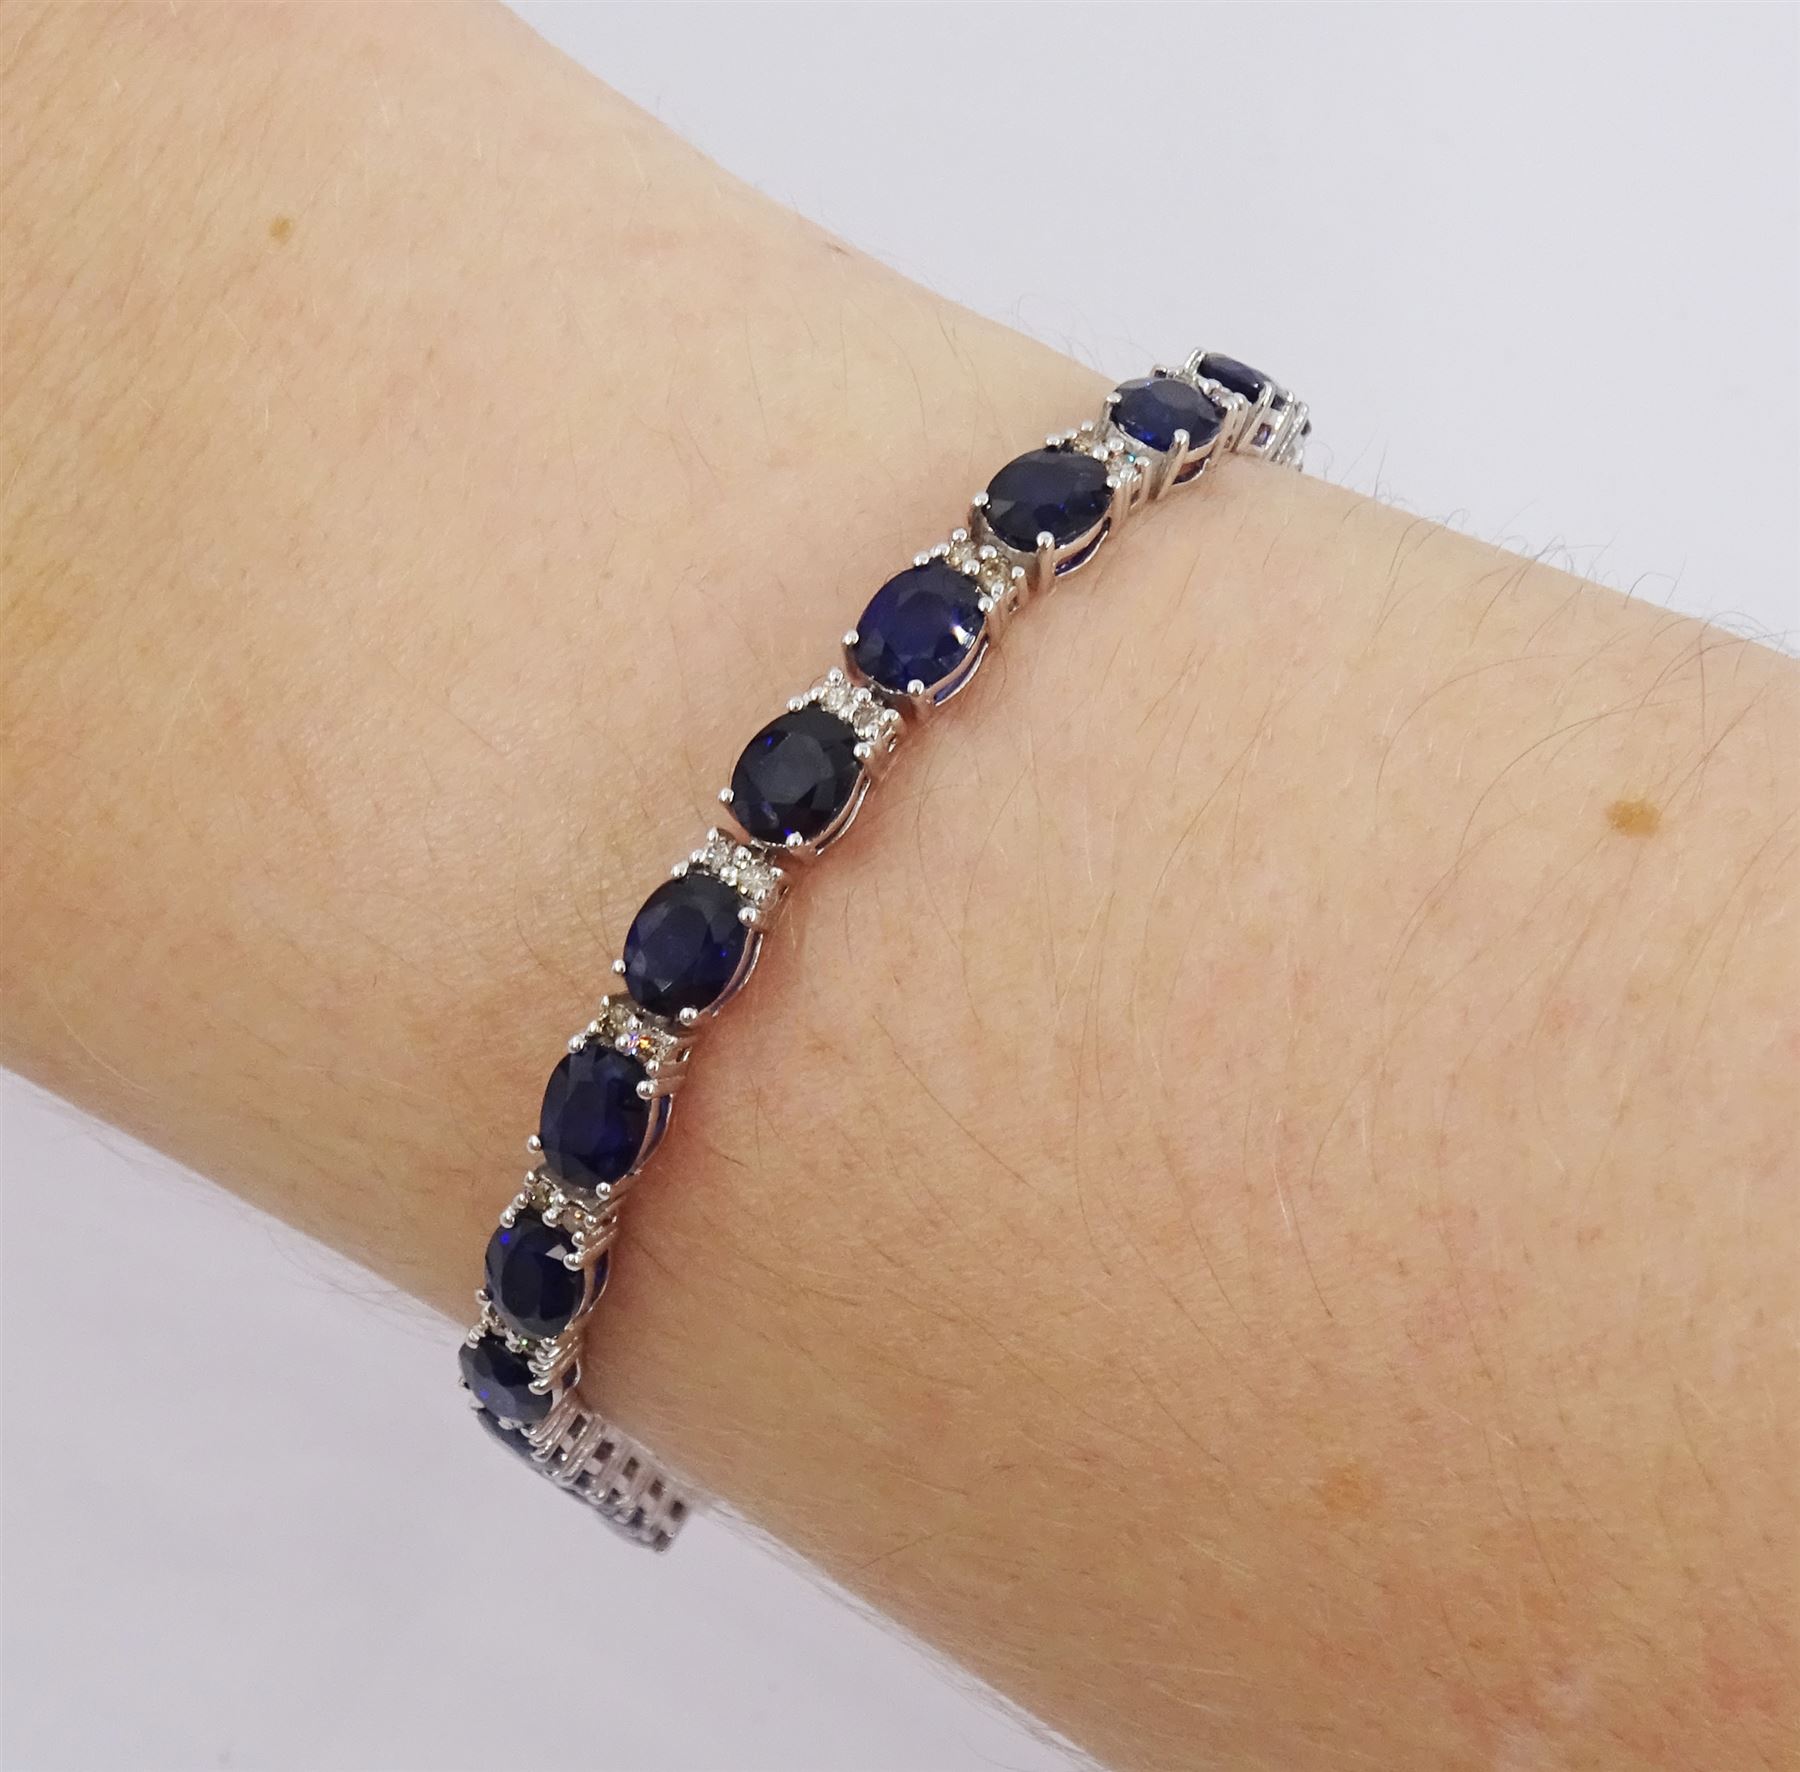 18ct white gold oval cut sapphire and round brilliant cut diamond bracelet - Image 4 of 5